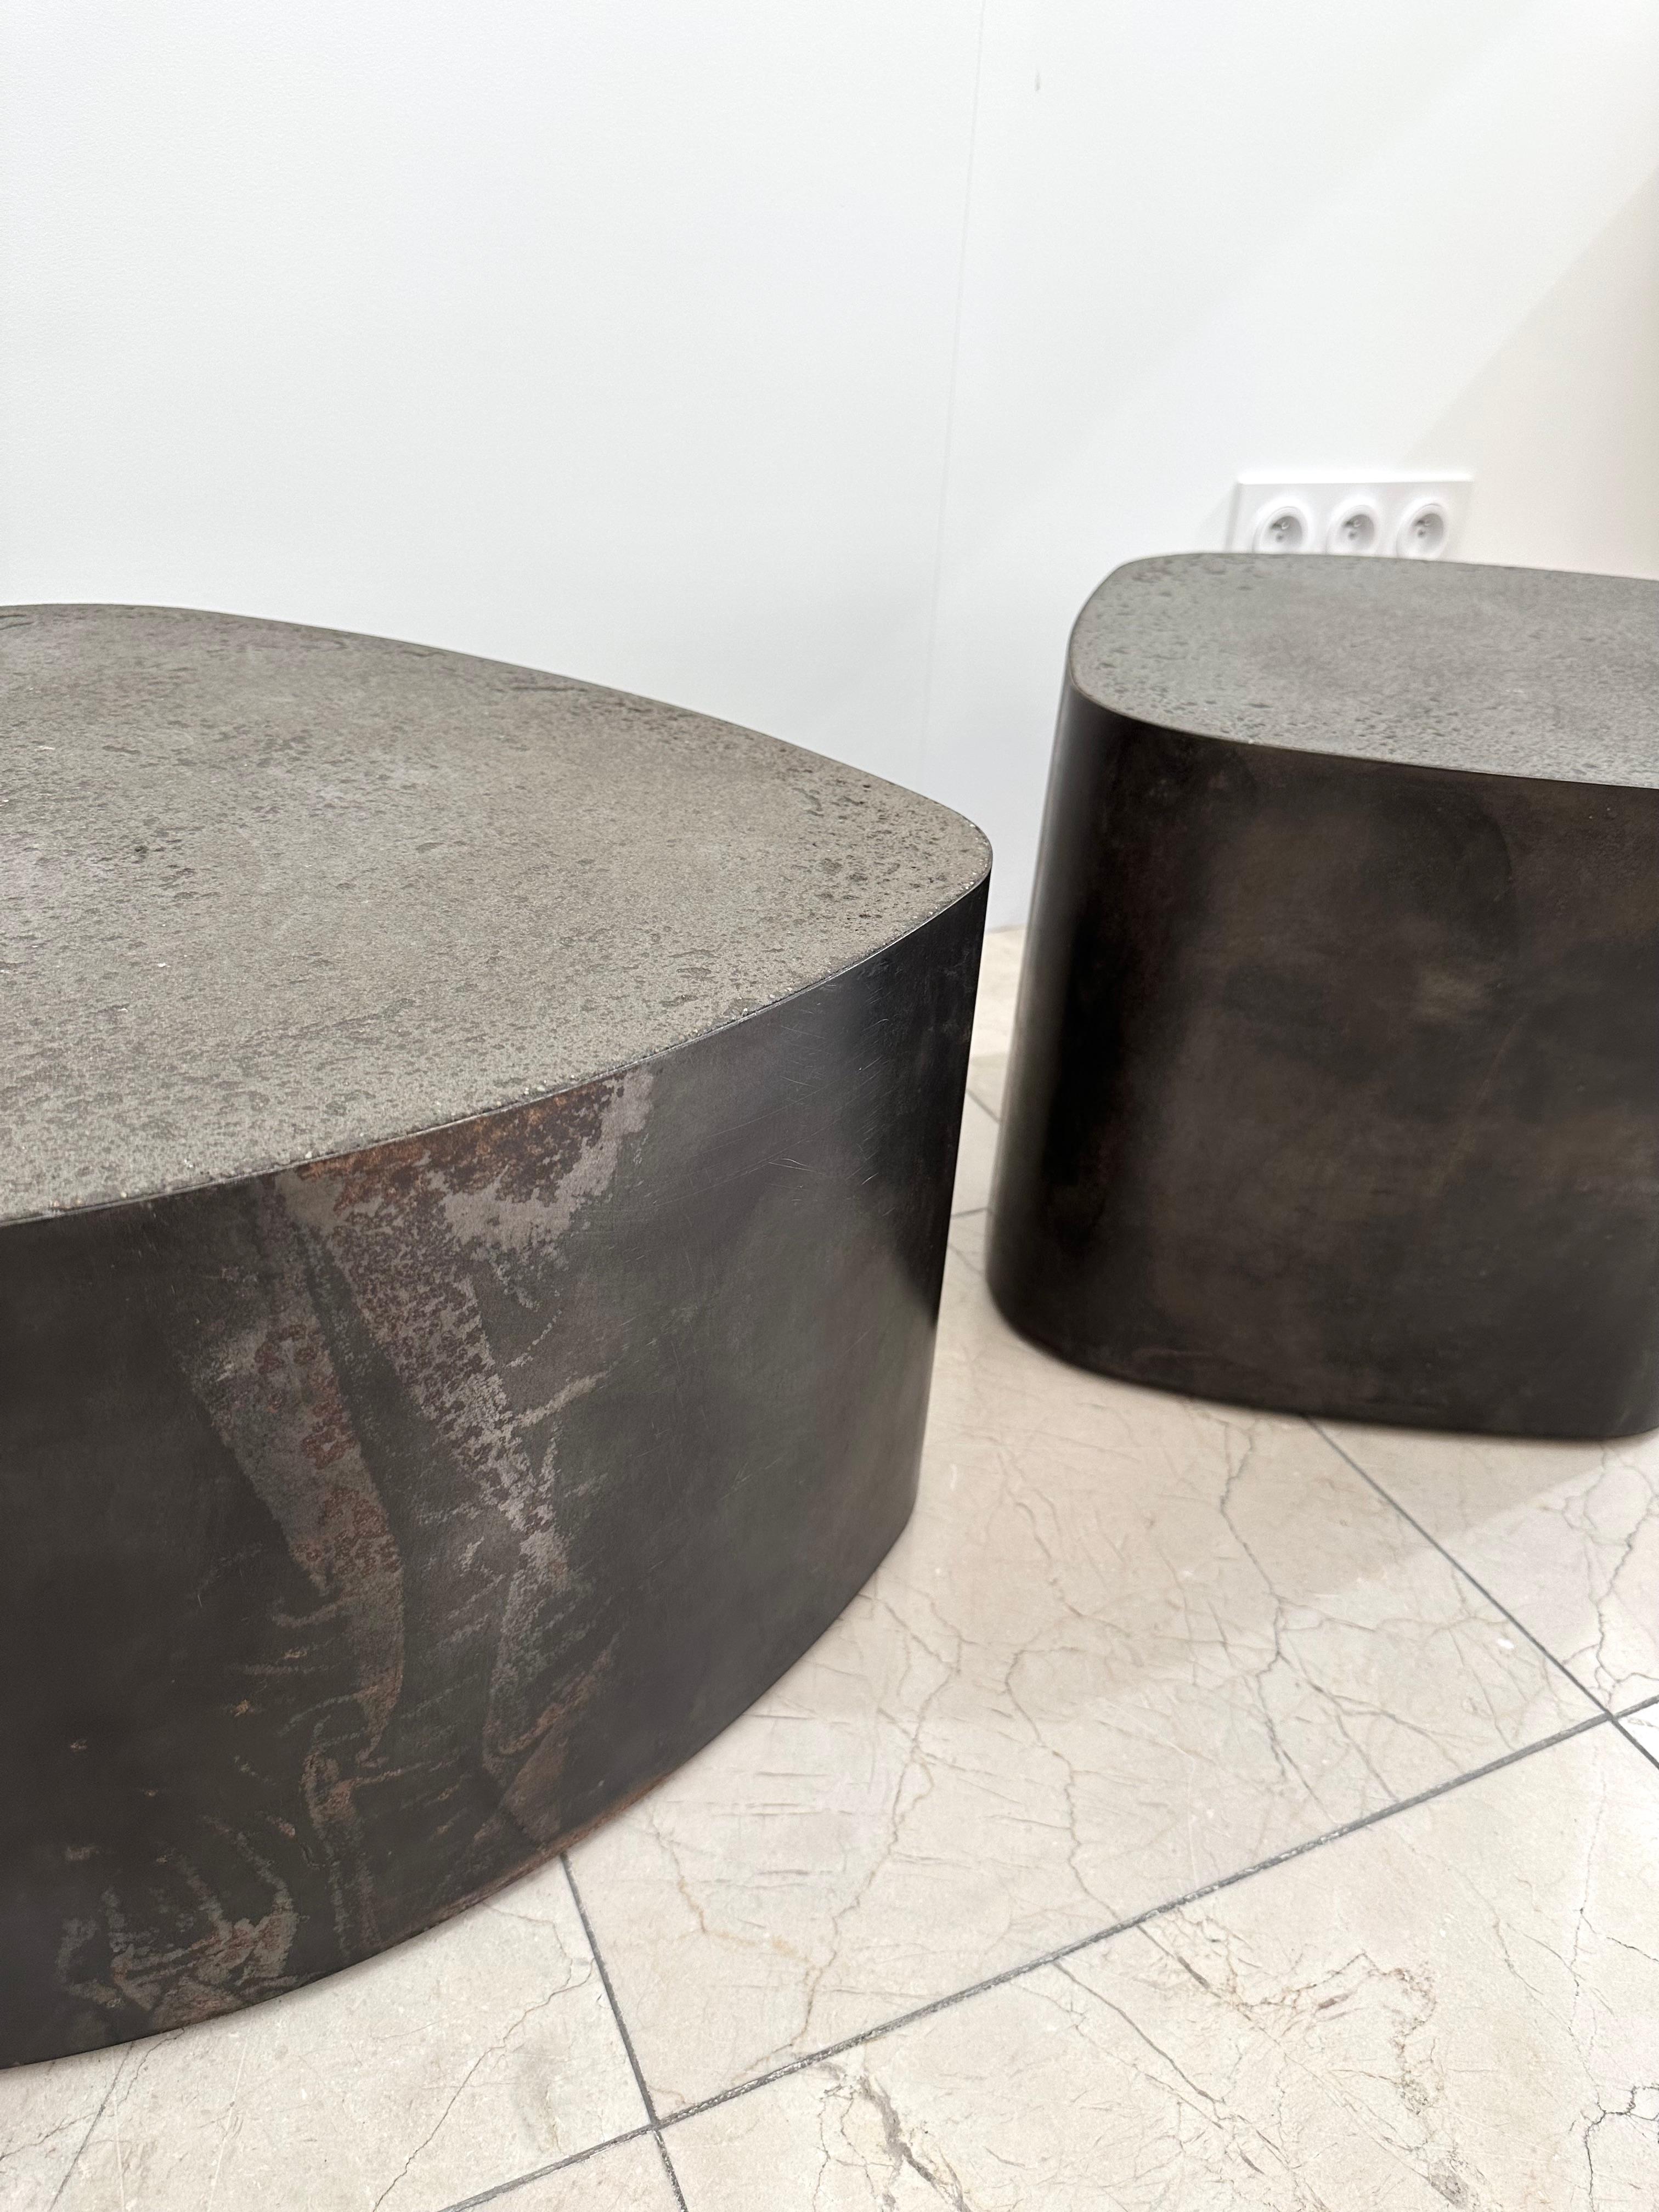 Contemporary Pair of Tables Are Steel and Concrete by Stéphane Ducatteau, France, 2000s